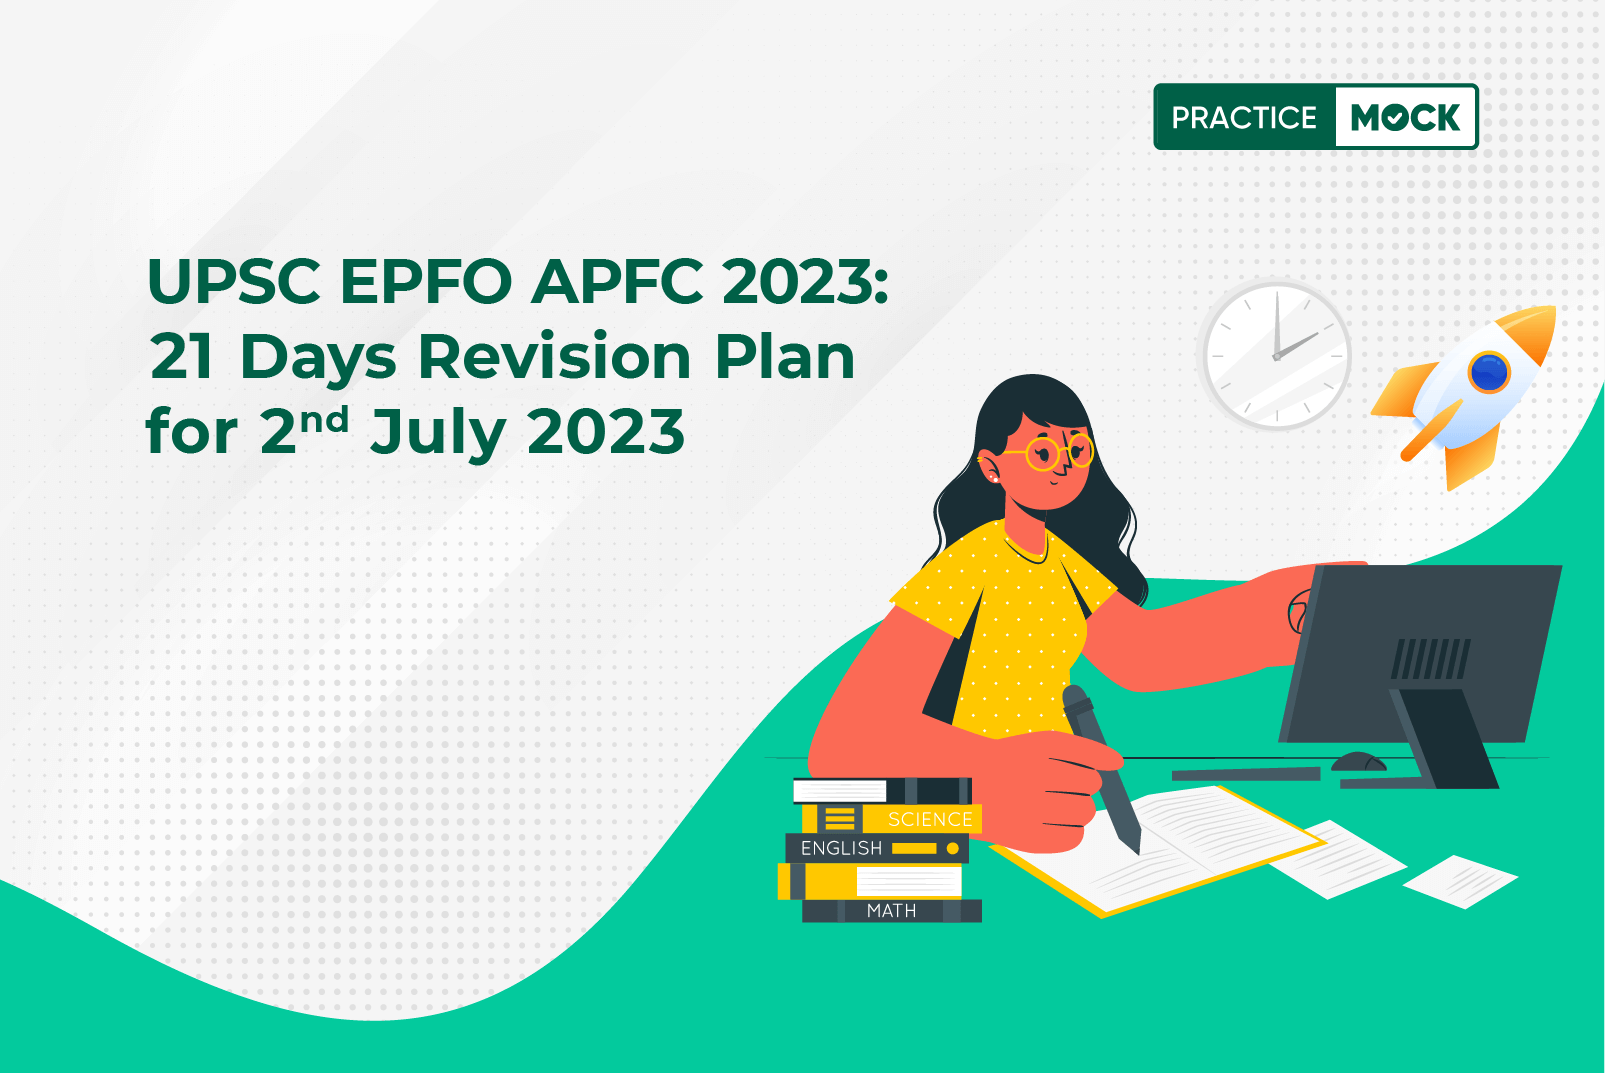 Upsc Epfo Apfc 2023 21 Days Revision Plan For 2nd July 2023 Practicemock